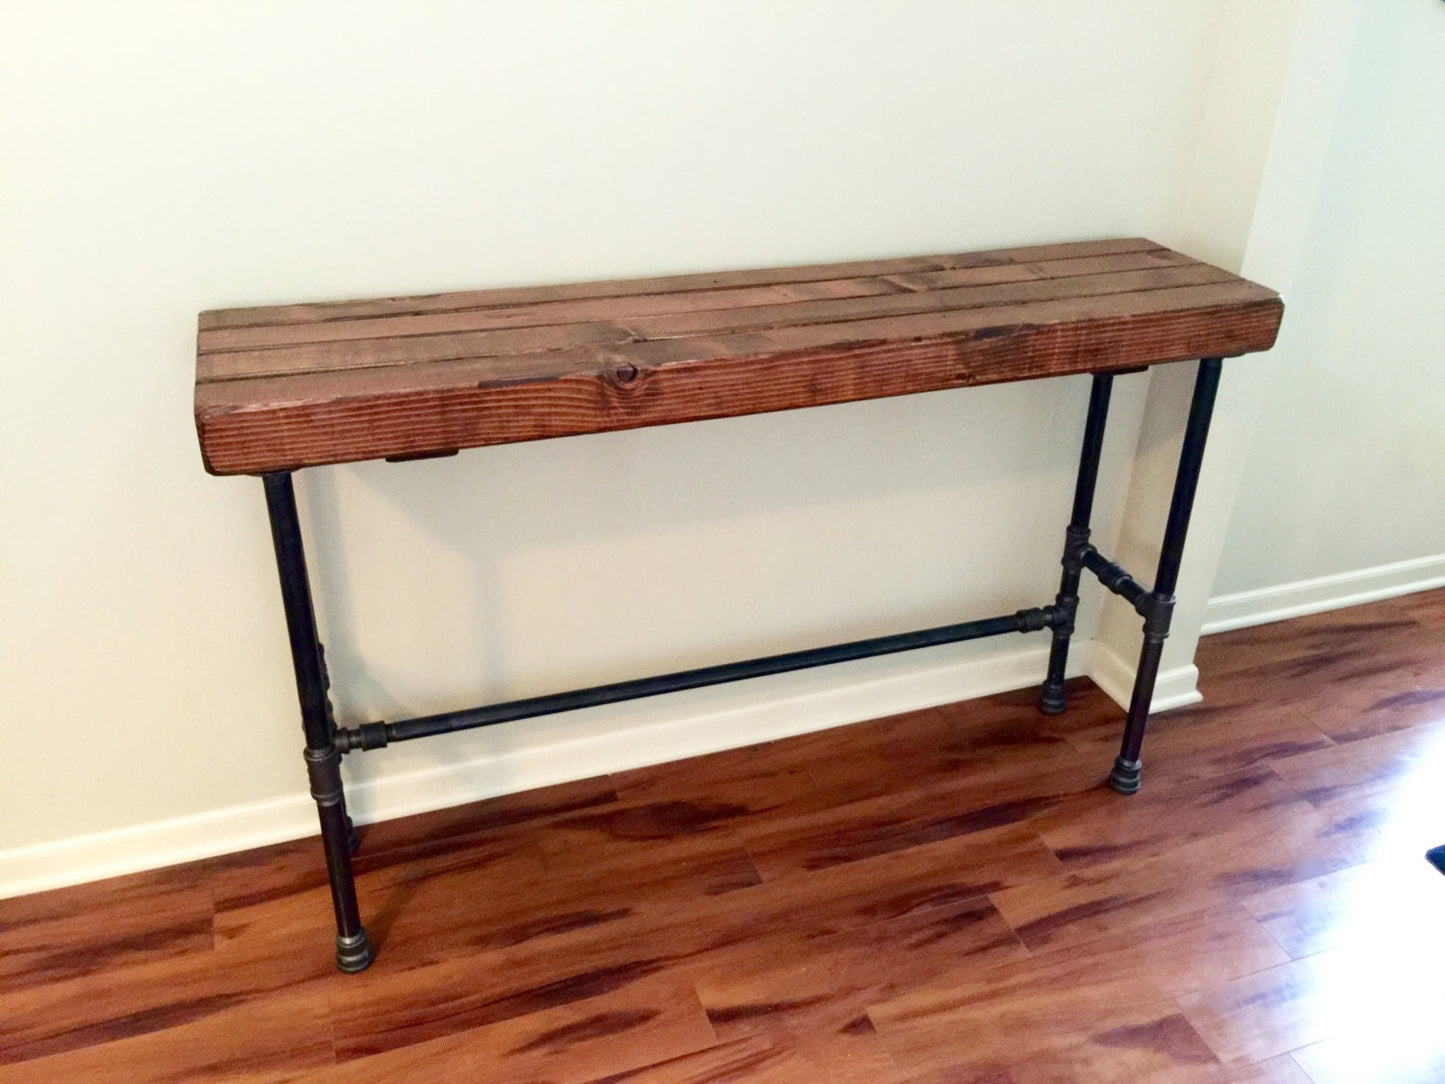 Steel and Wood Bar Table - 3.5in Thick Table Top and Large 1" Pipe